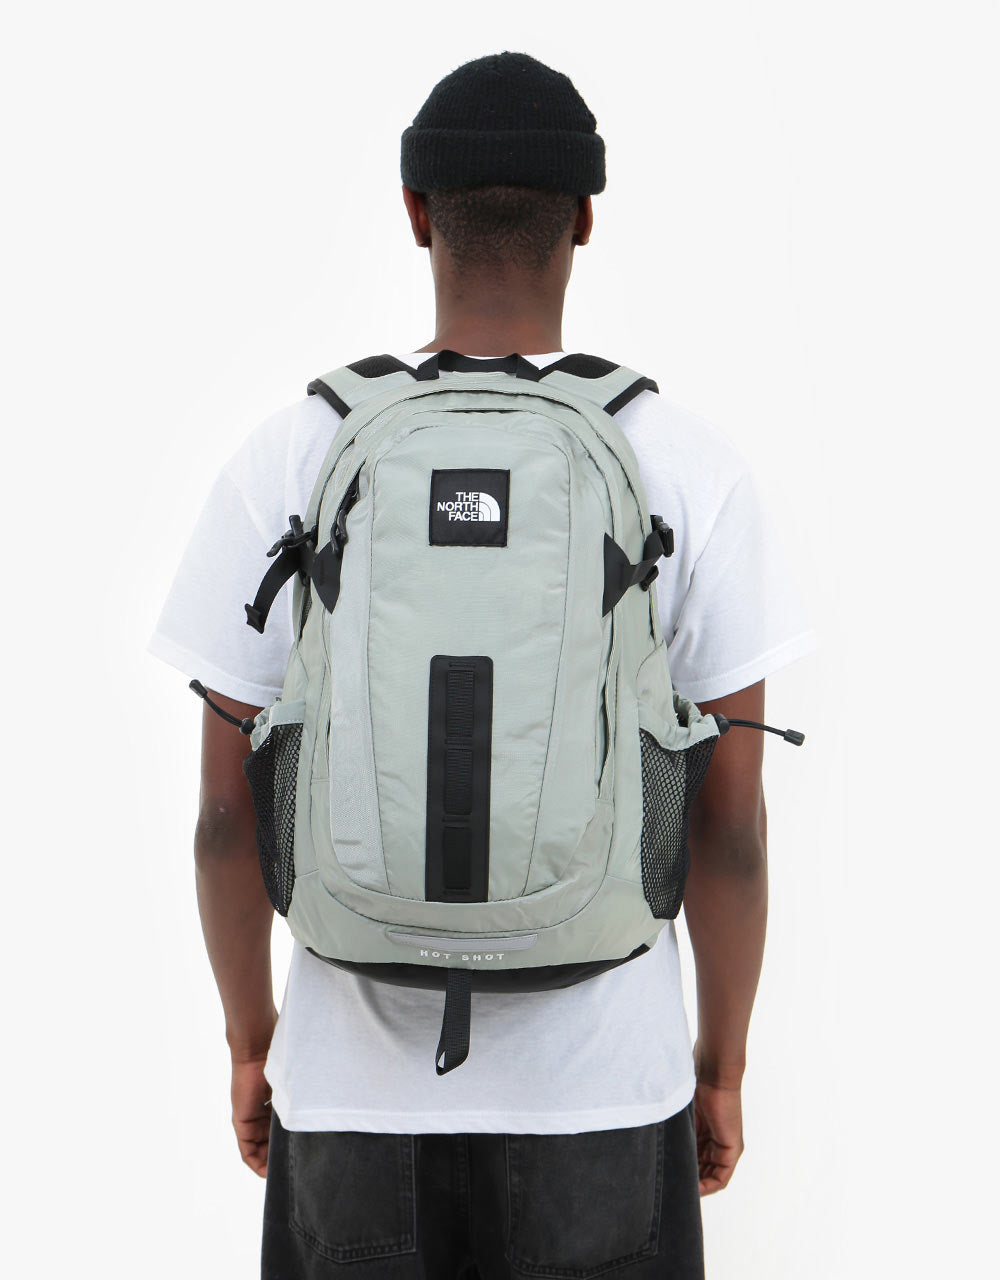 The North Face Hot Shot SE Backpack - Wrought Iron/TNF Black – Route One